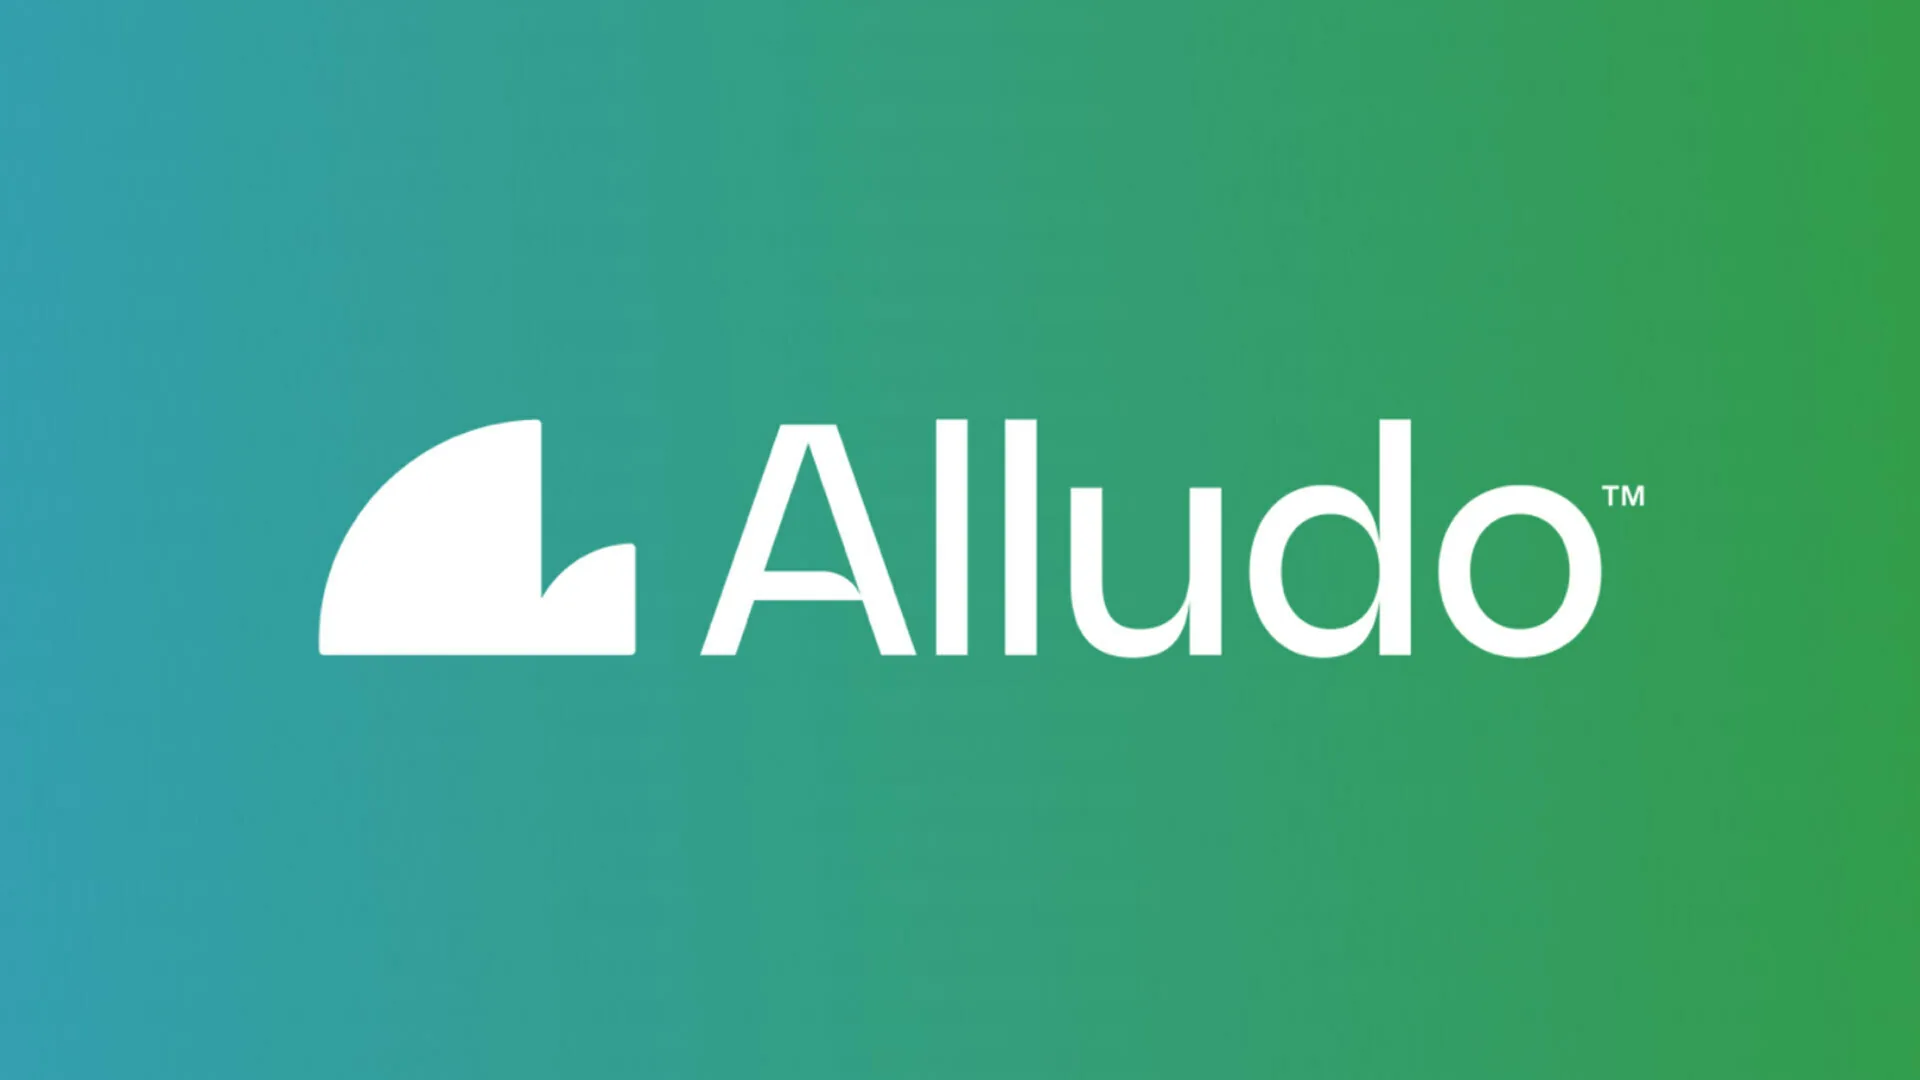 Corel changes name to Alludo, but product names will remain the same